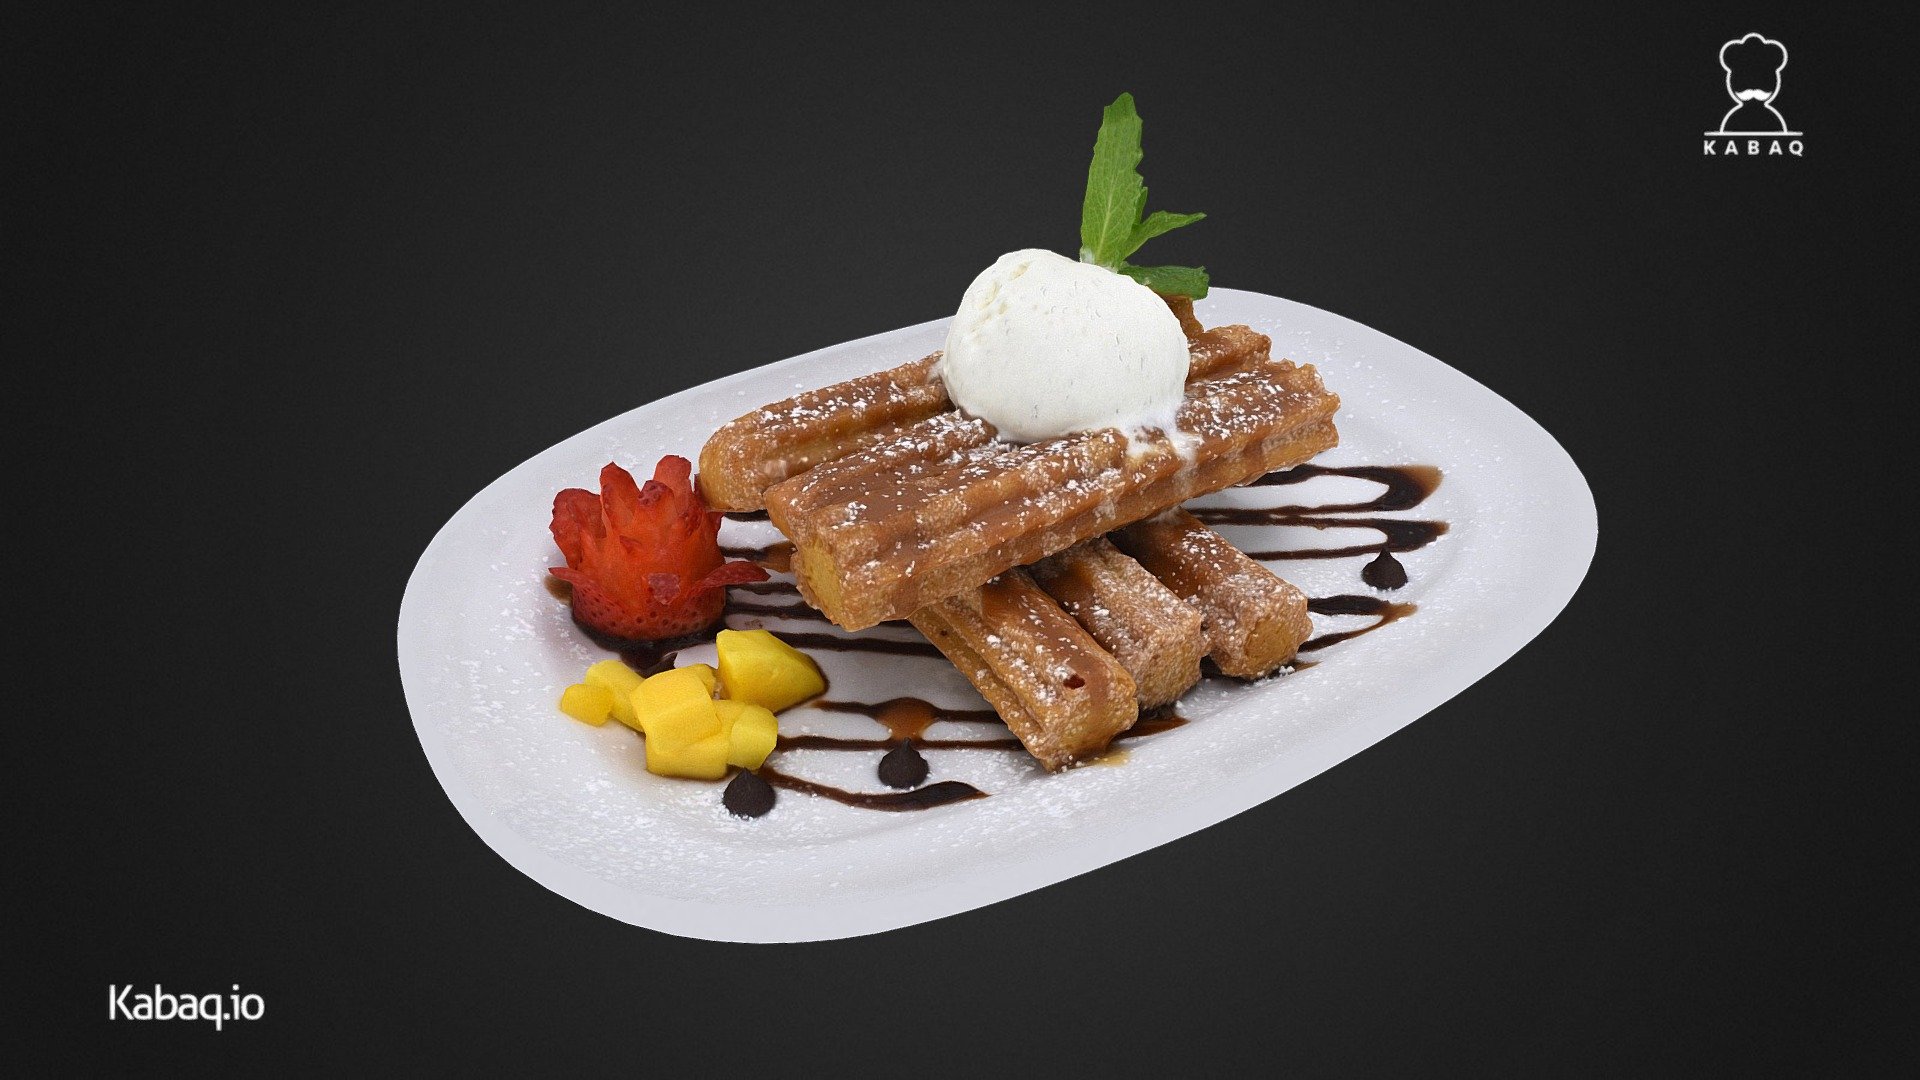 Mexican Churros - 3D model by QReal Lifelike 3D (@kabaq) 3d model